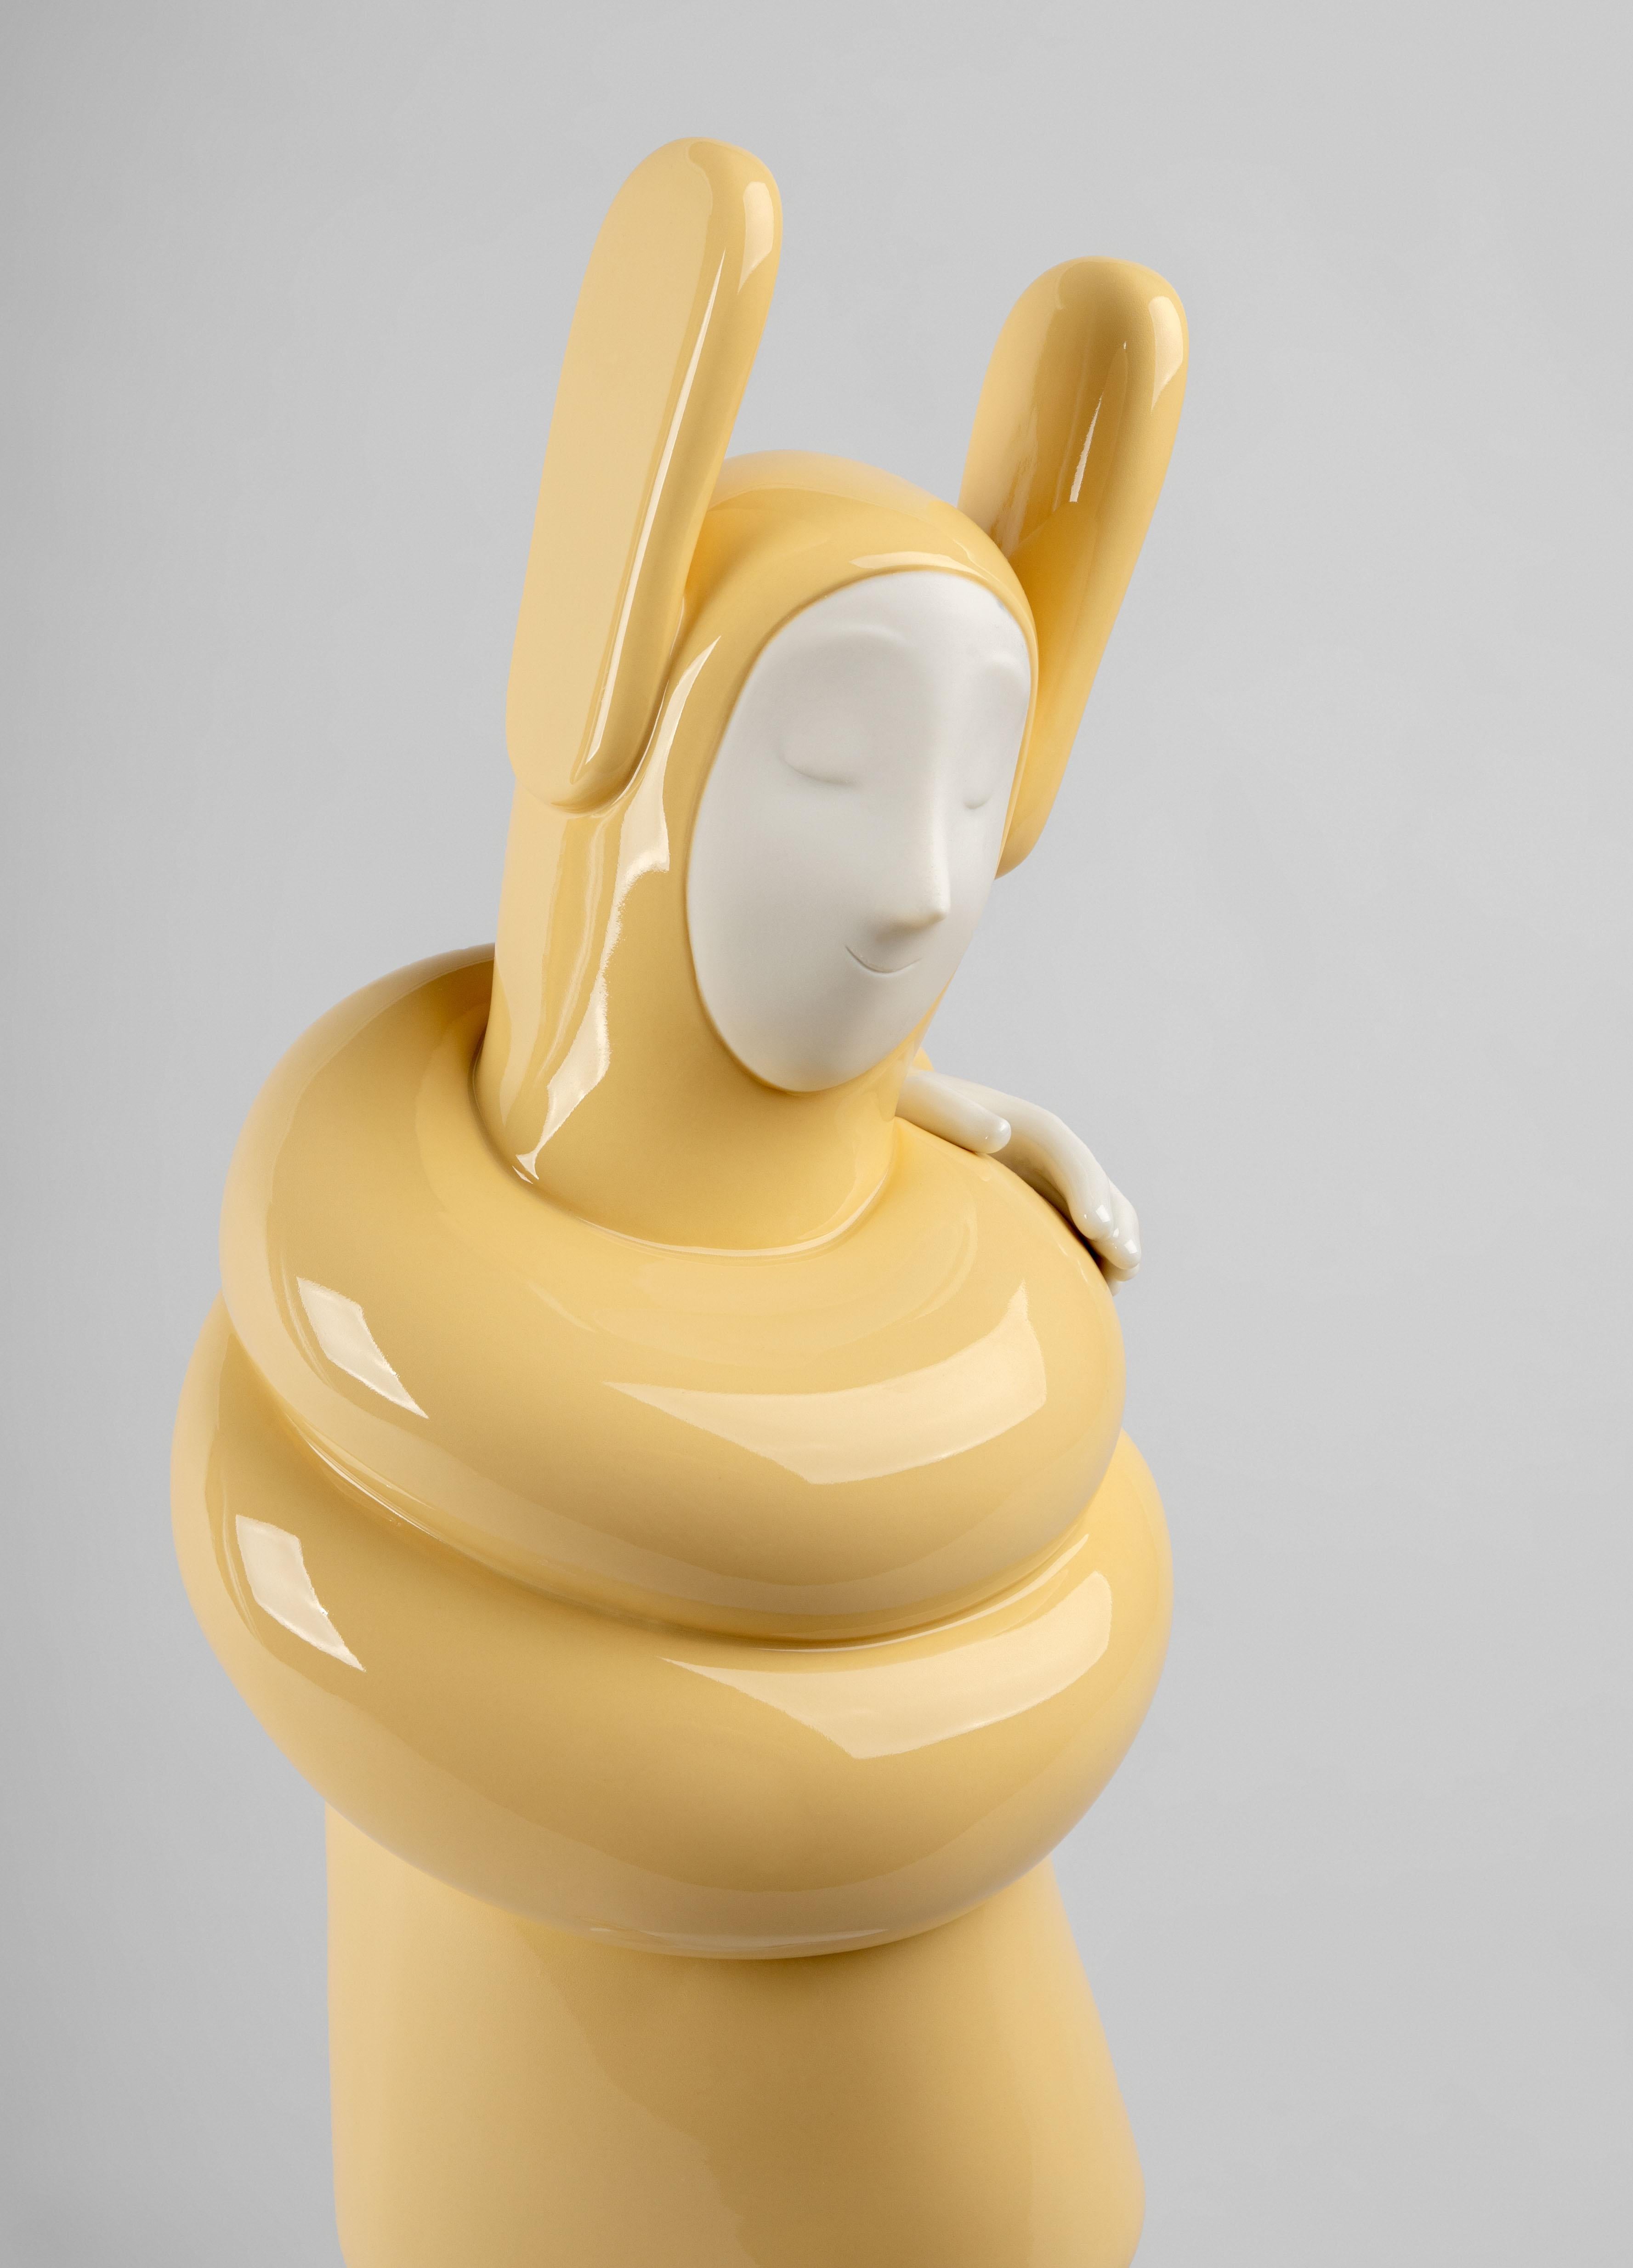 Hand-Crafted Embraced 'Yellow' Sculpture For Sale